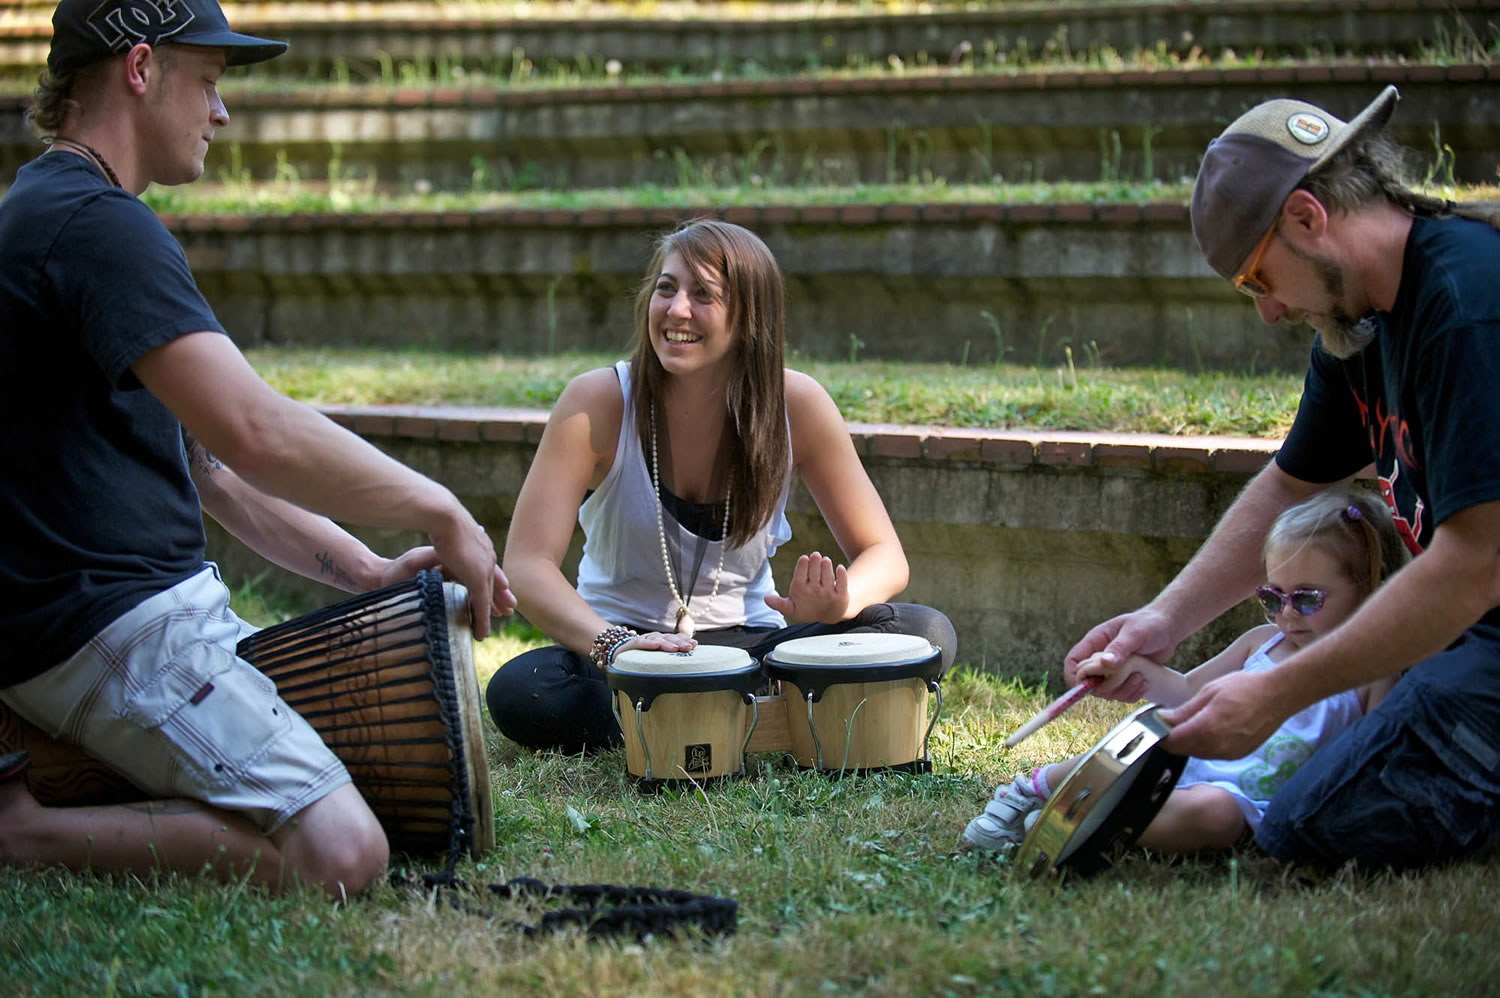 From left, Luke Alexander, 25, of Vancouver; Sarah Cayton; and Ray DeLorme, 38, of Woodland, with his daughter, Mackenzie, 2, participate in a drum circle at Water Works Park on Wednesday.